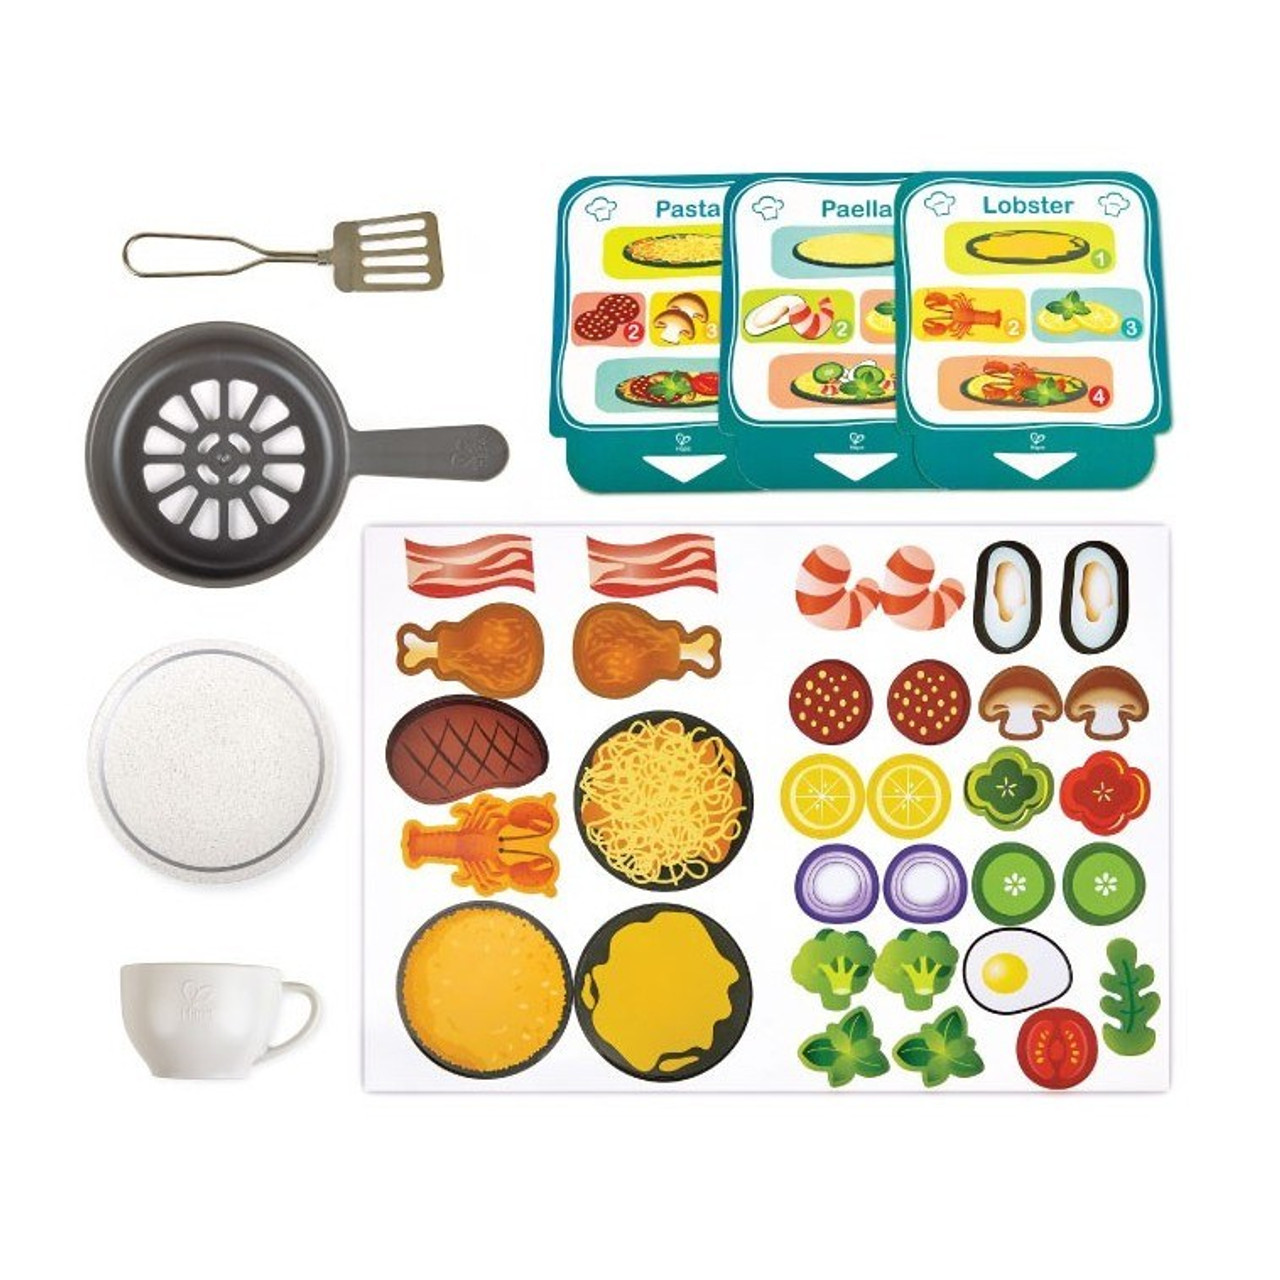  Hape Pasta Wooden Play Kitchen Food Set for 3+ Years